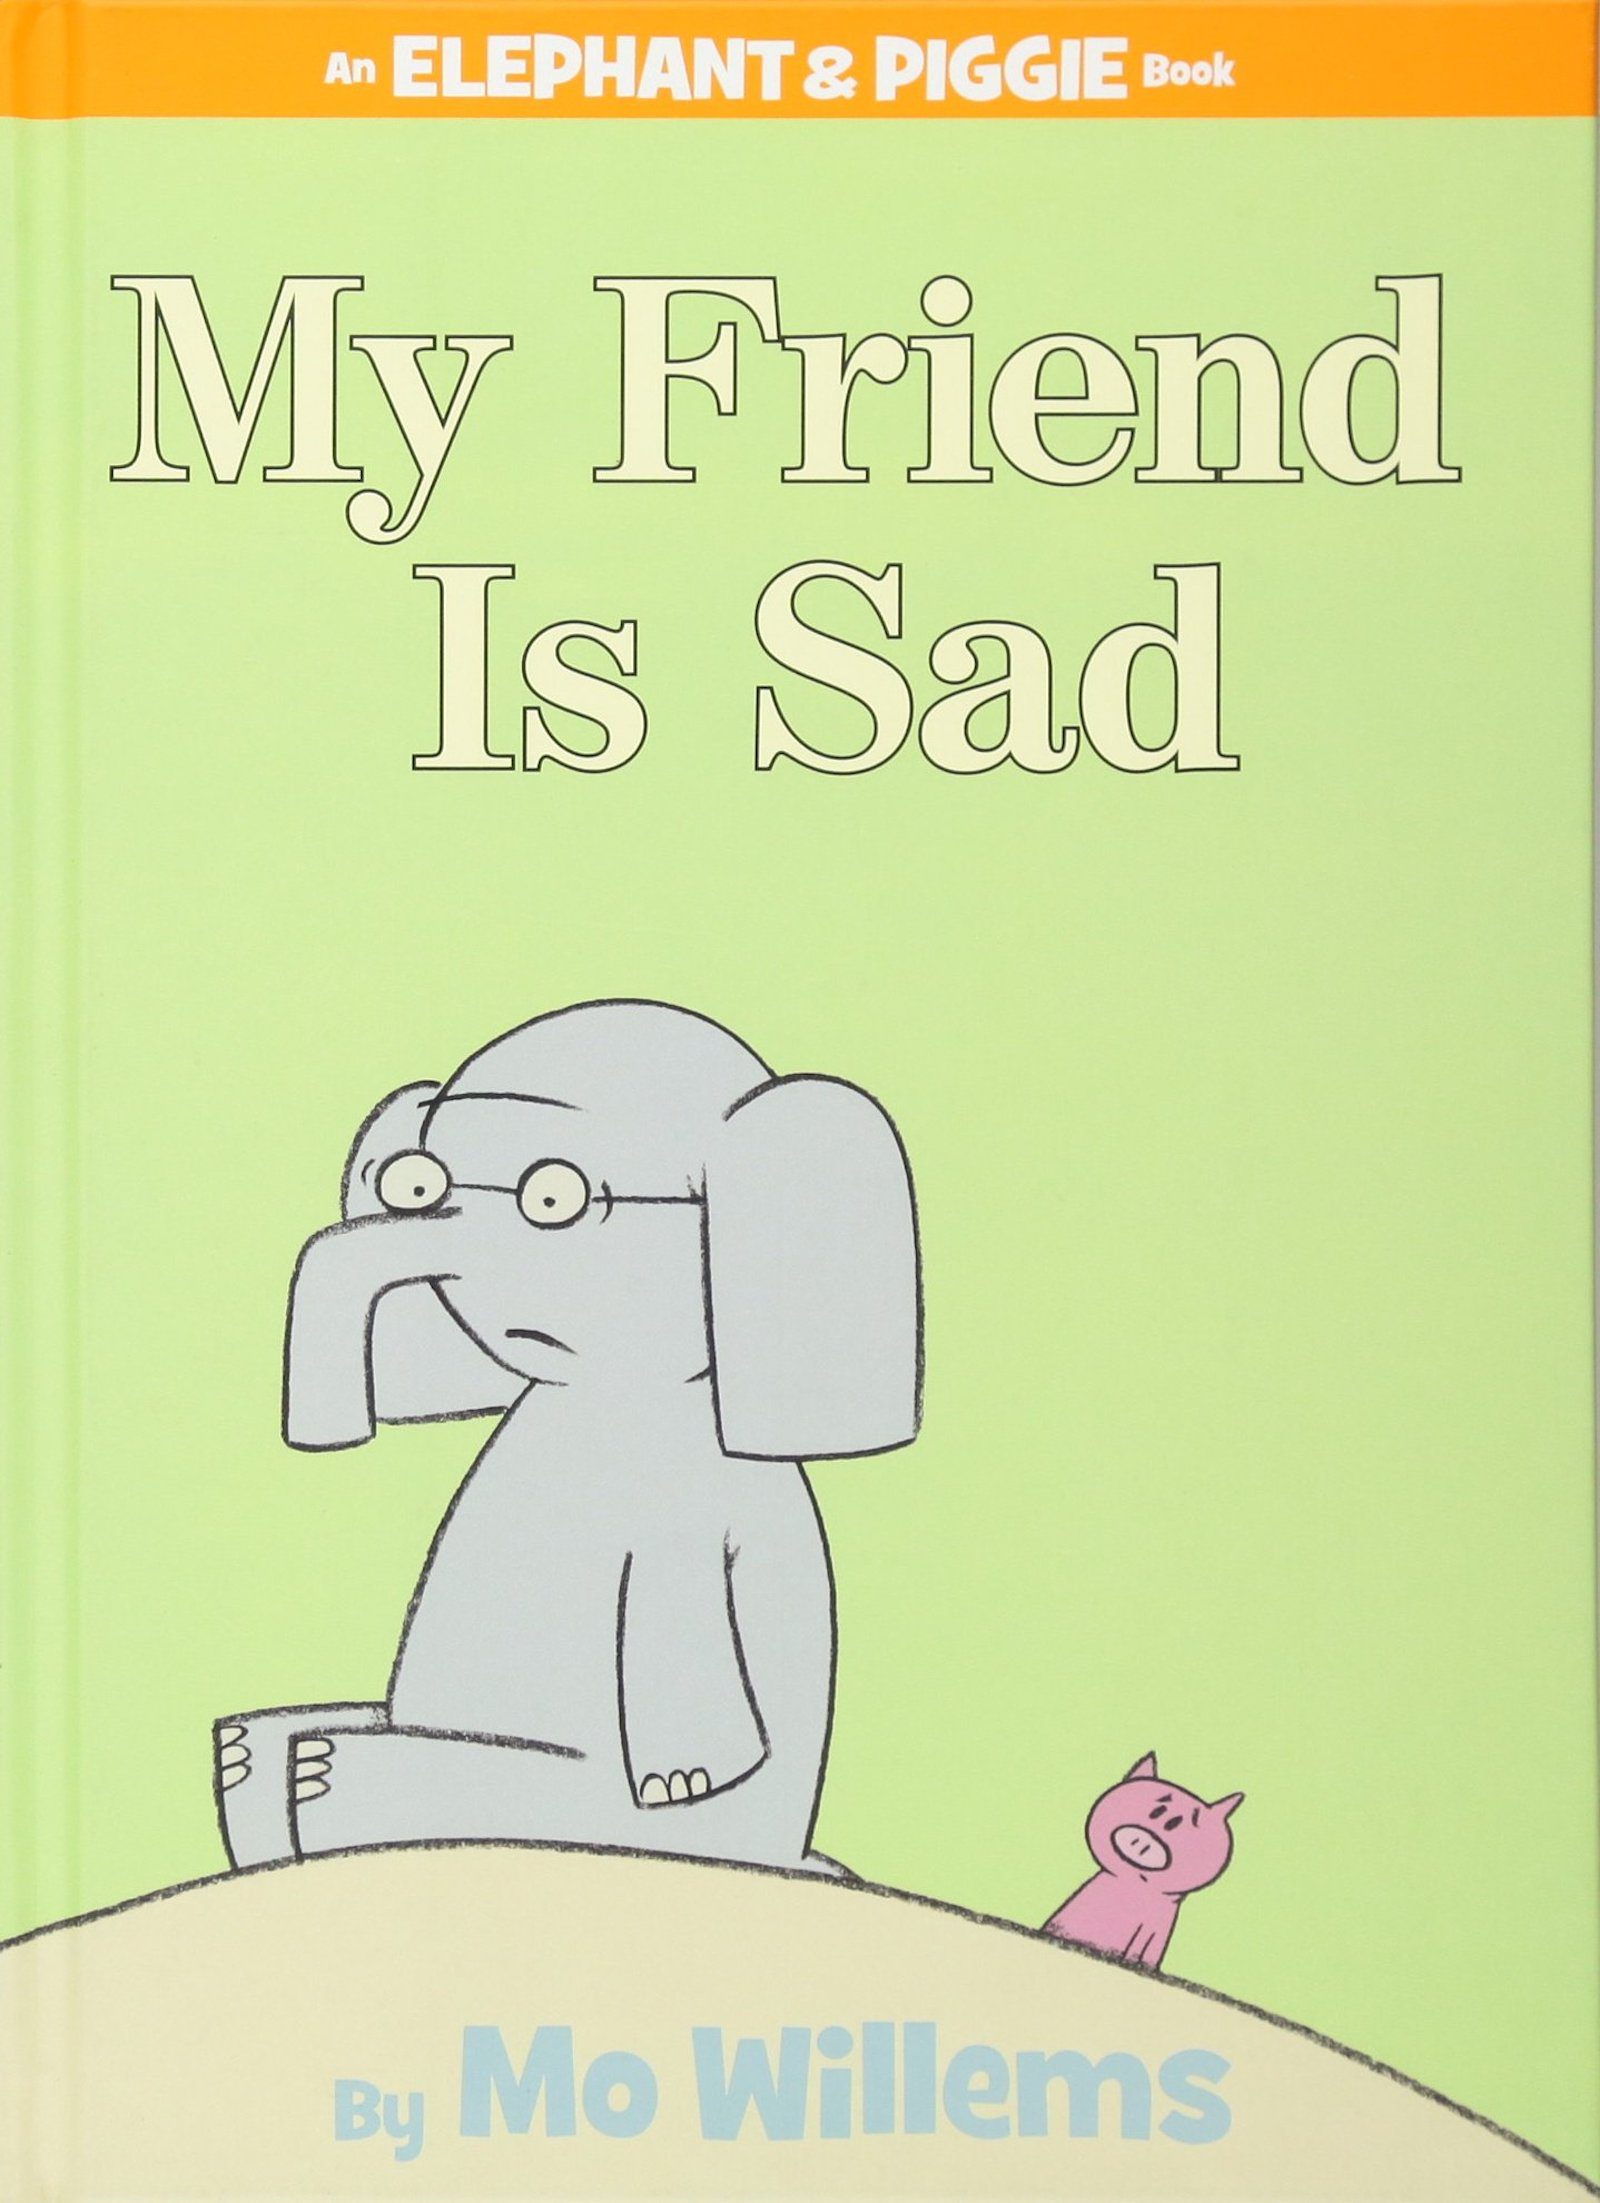 My Friend is Sad book cover -- books about sadness